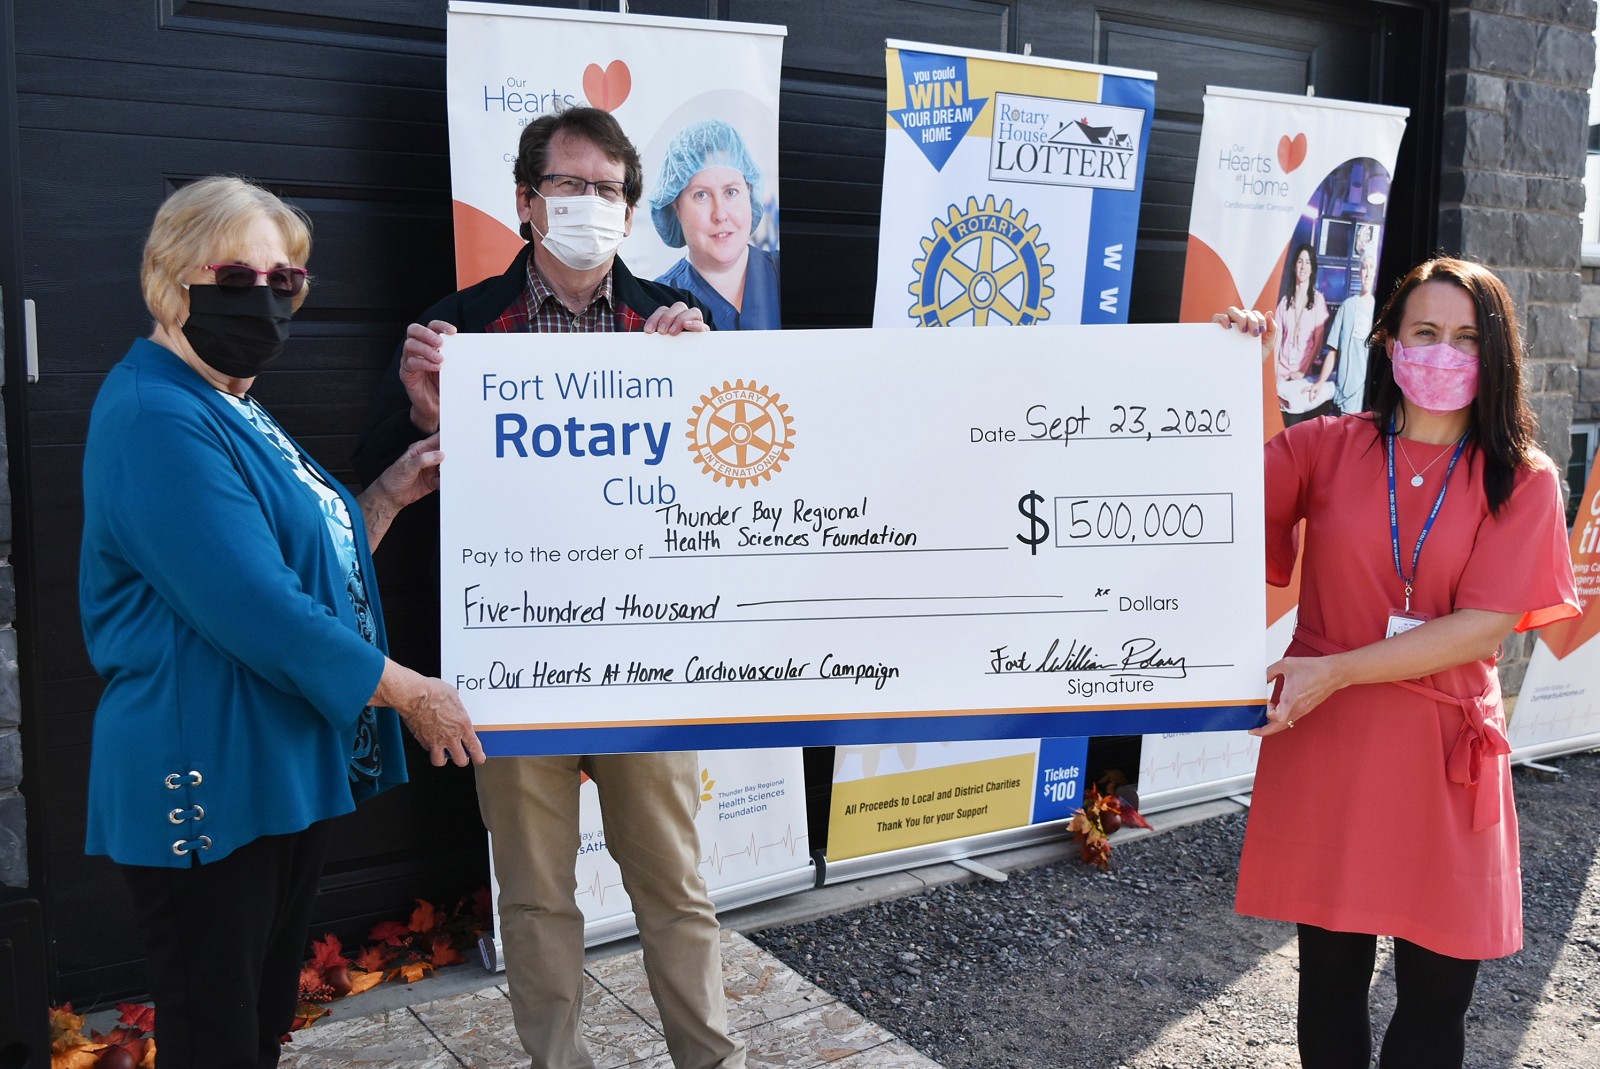 Fort William Rotary Club Announces $500K Donation to the Our Hearts At Home Cardiovascular Campain